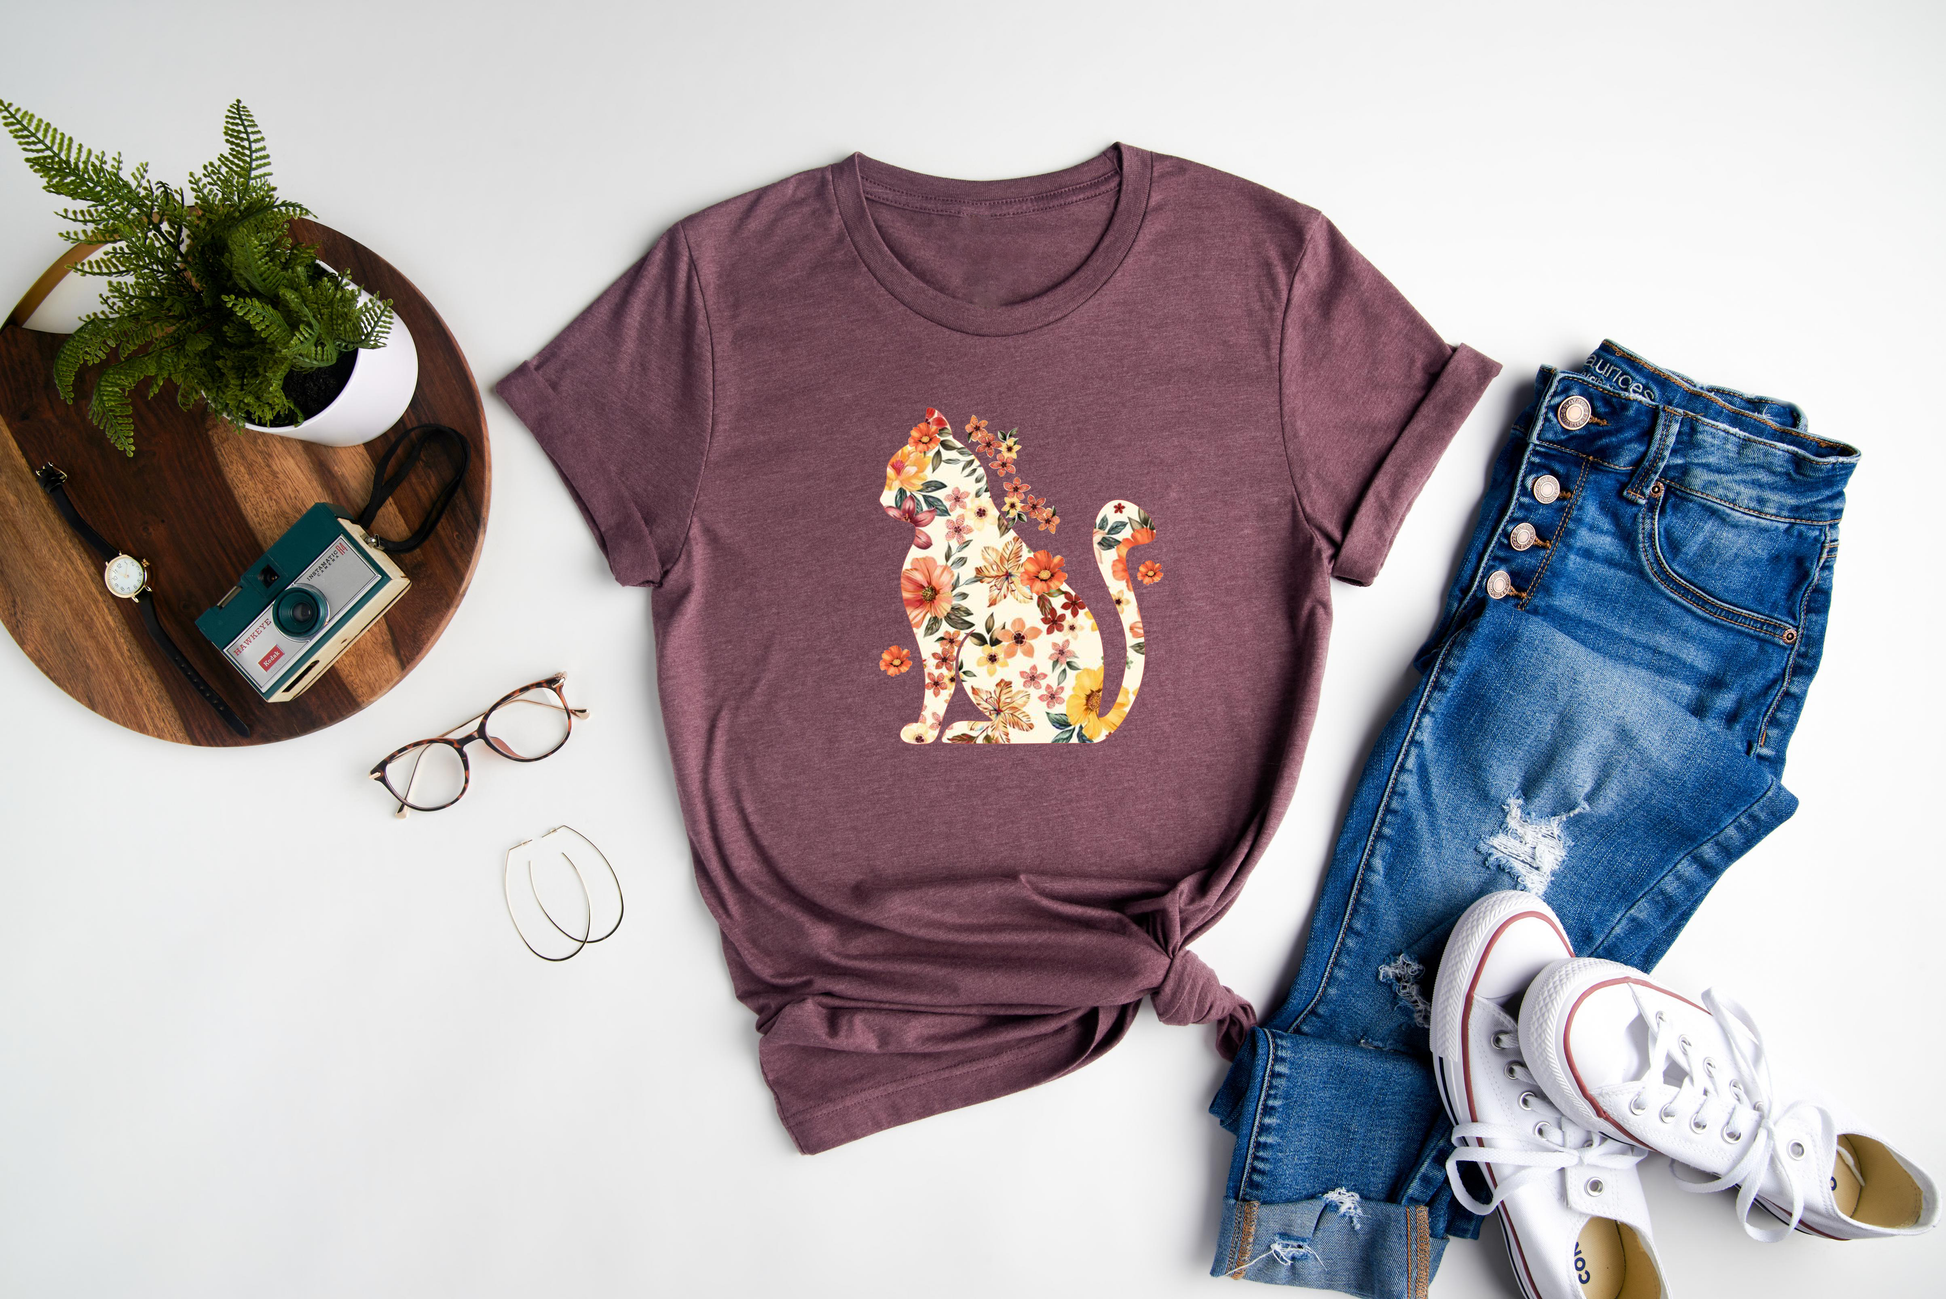 featuring a playful "Cat Mom" design for all cat-loving moms. 